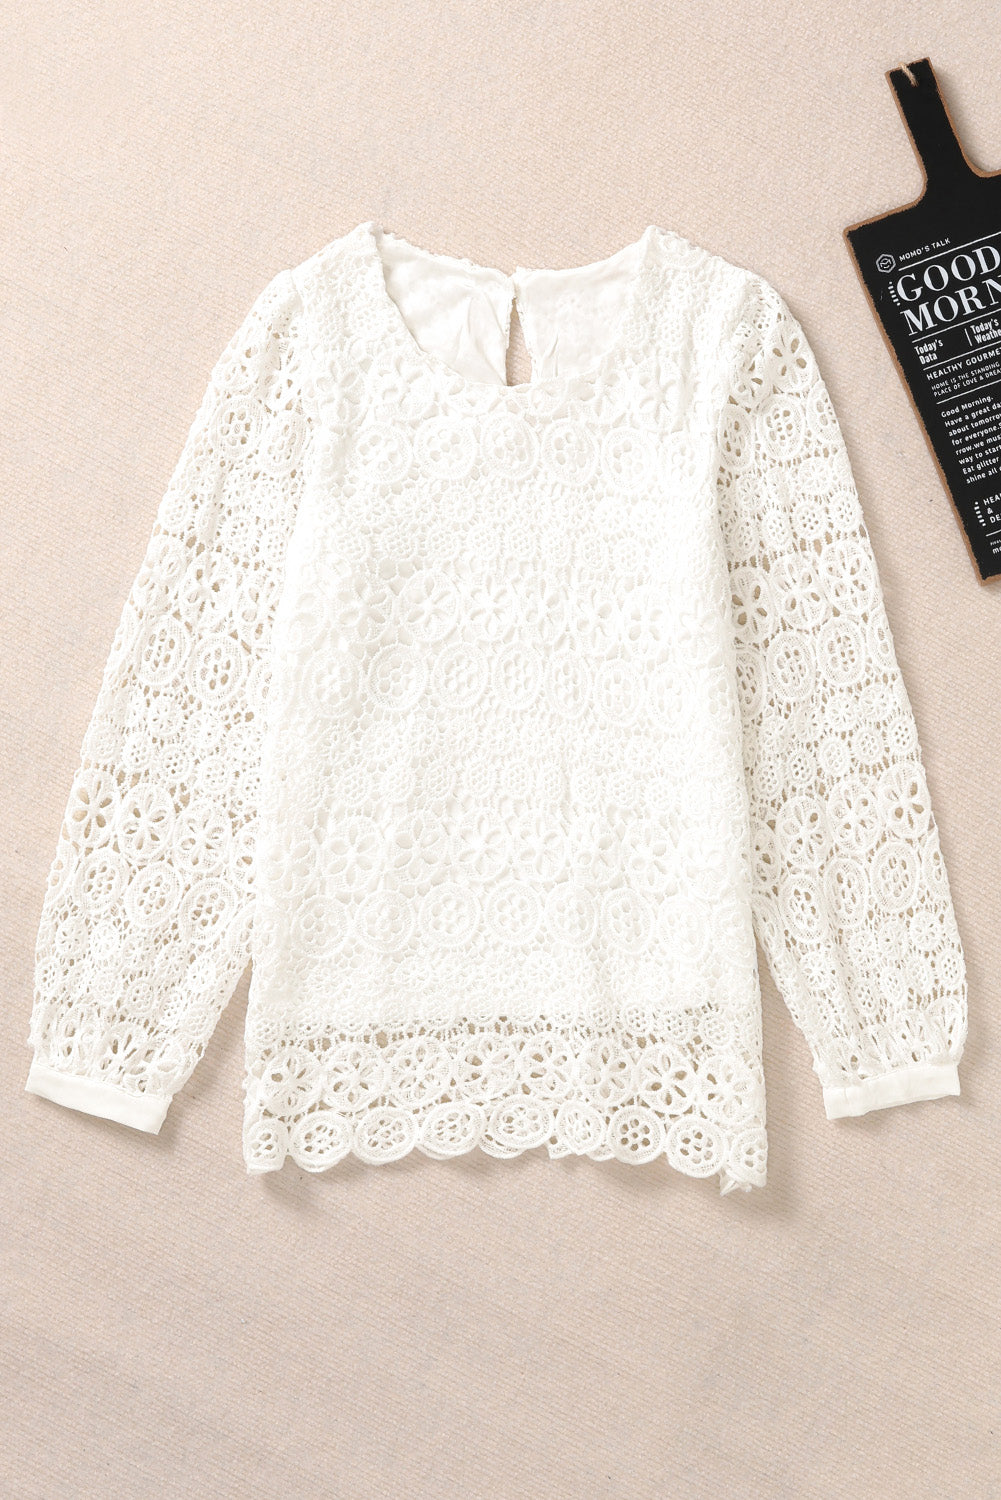 Beige Lace Contrast Hollow-out Long Sleeve Blouse